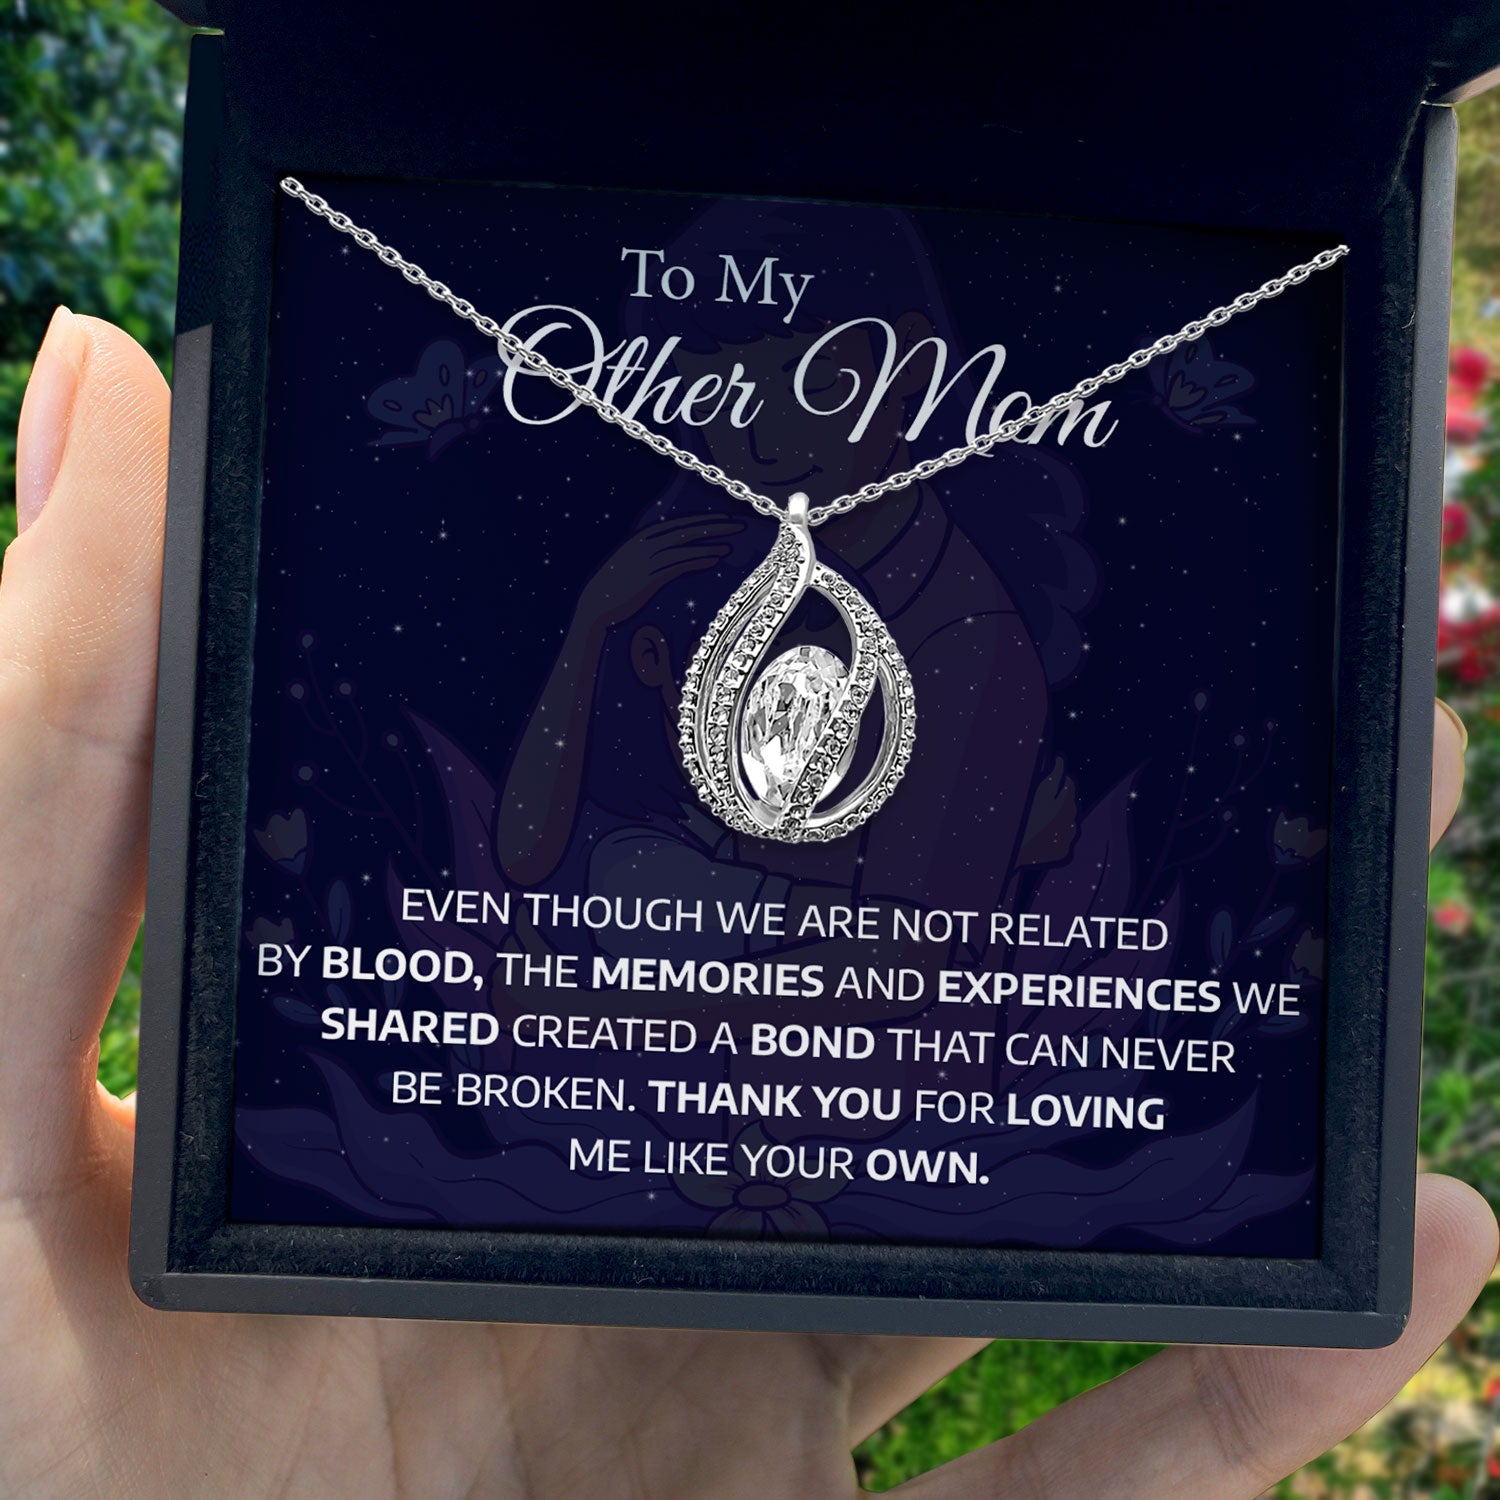 To My Other Mom - Thank You For Loving Me Like Your Own - Orbital Birdcage Necklace